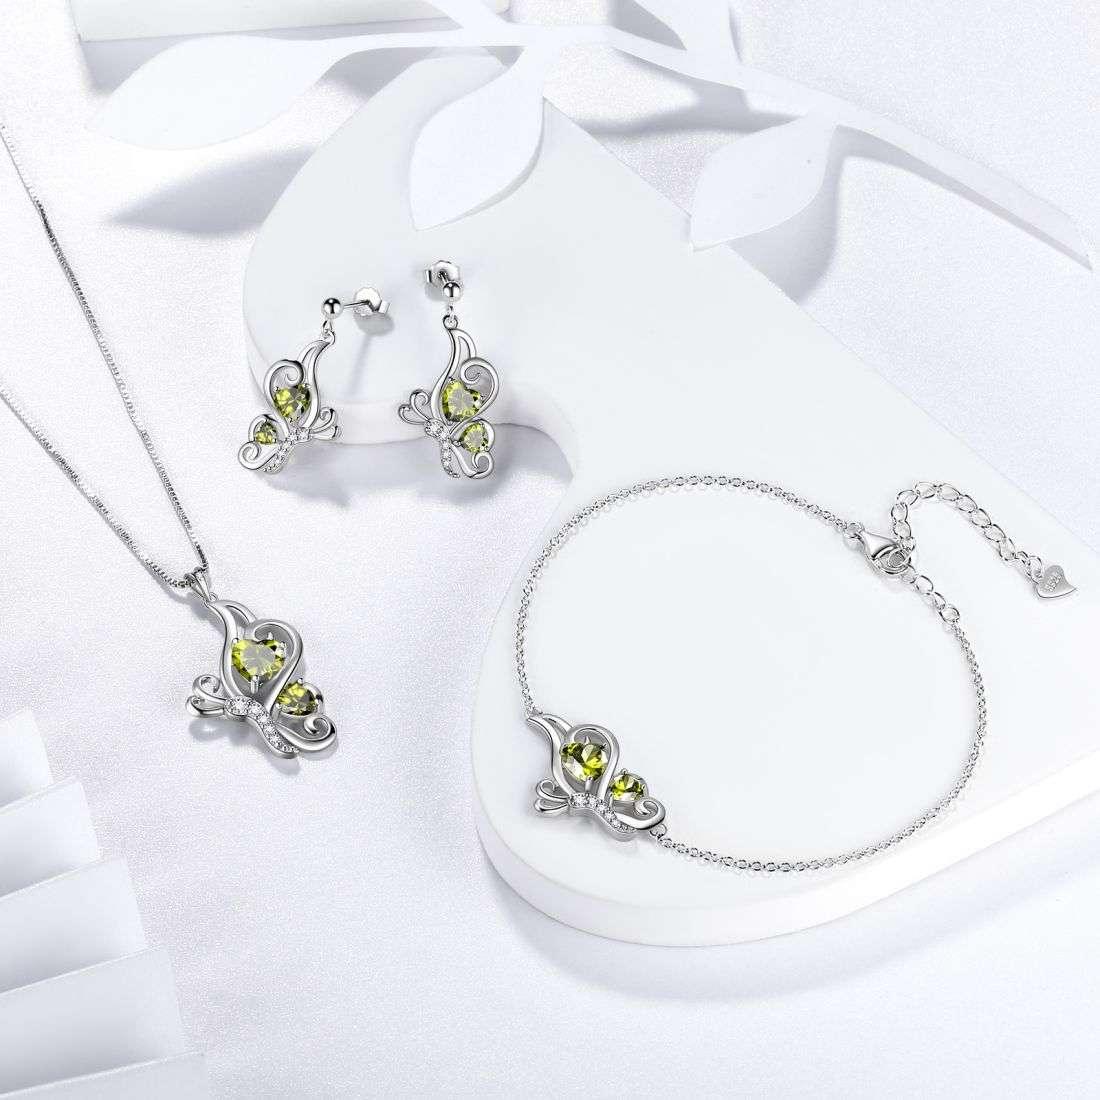 Butterfly Birthstone August Peridot Necklace Sterling Silver - Necklaces - Aurora Tears